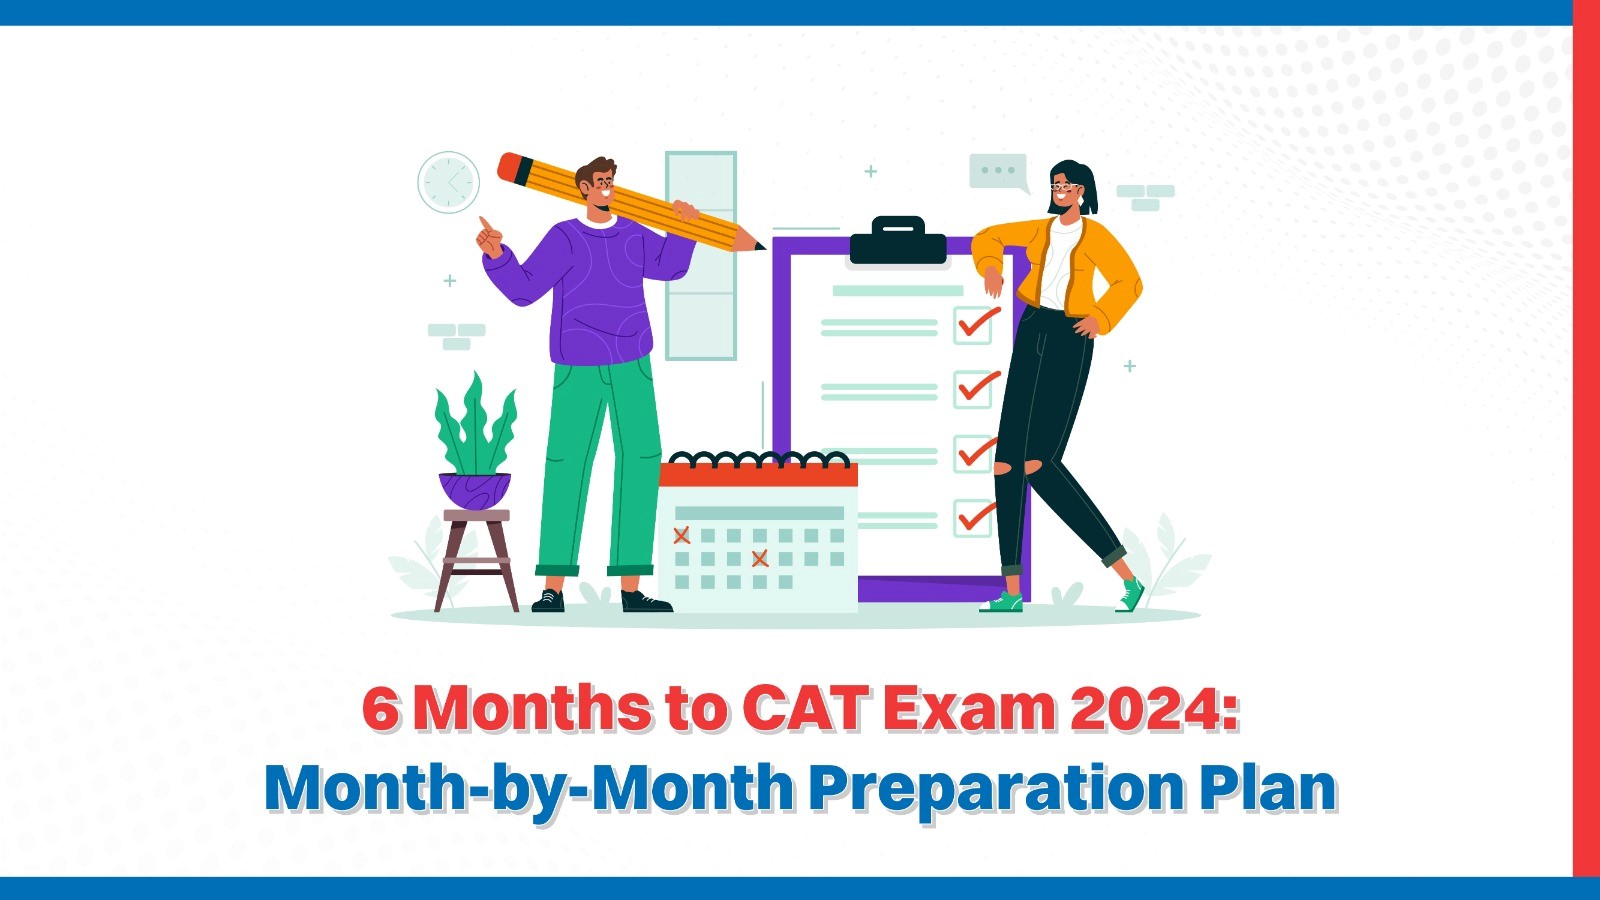 6 months to CAT Exam 2024 Month by Month Preparation Plan.jpg